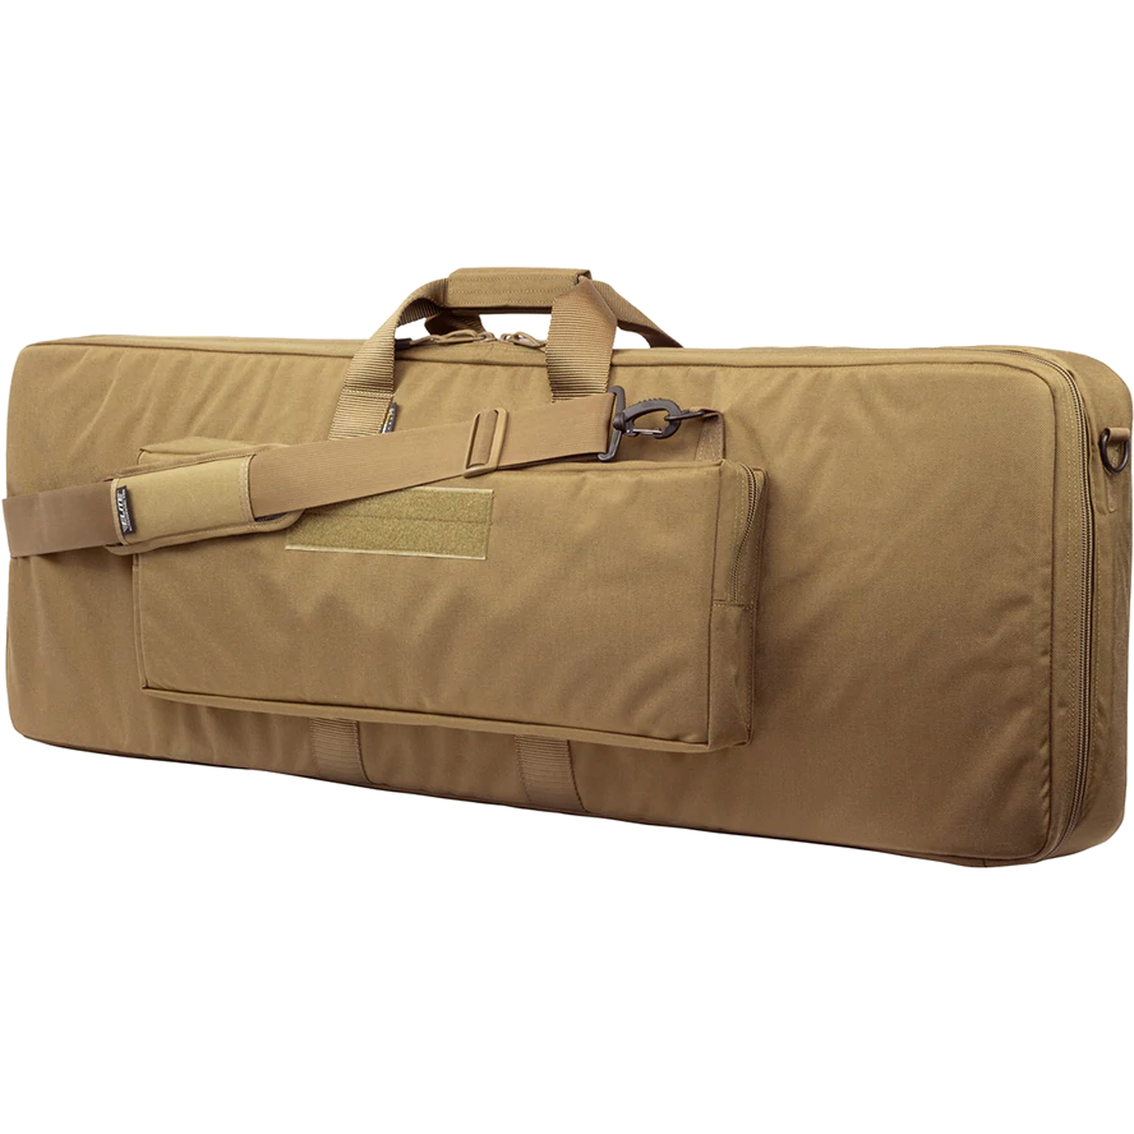 Elite Survival Covert Operations Discreet 33 in. Rifle Case - Image 2 of 2